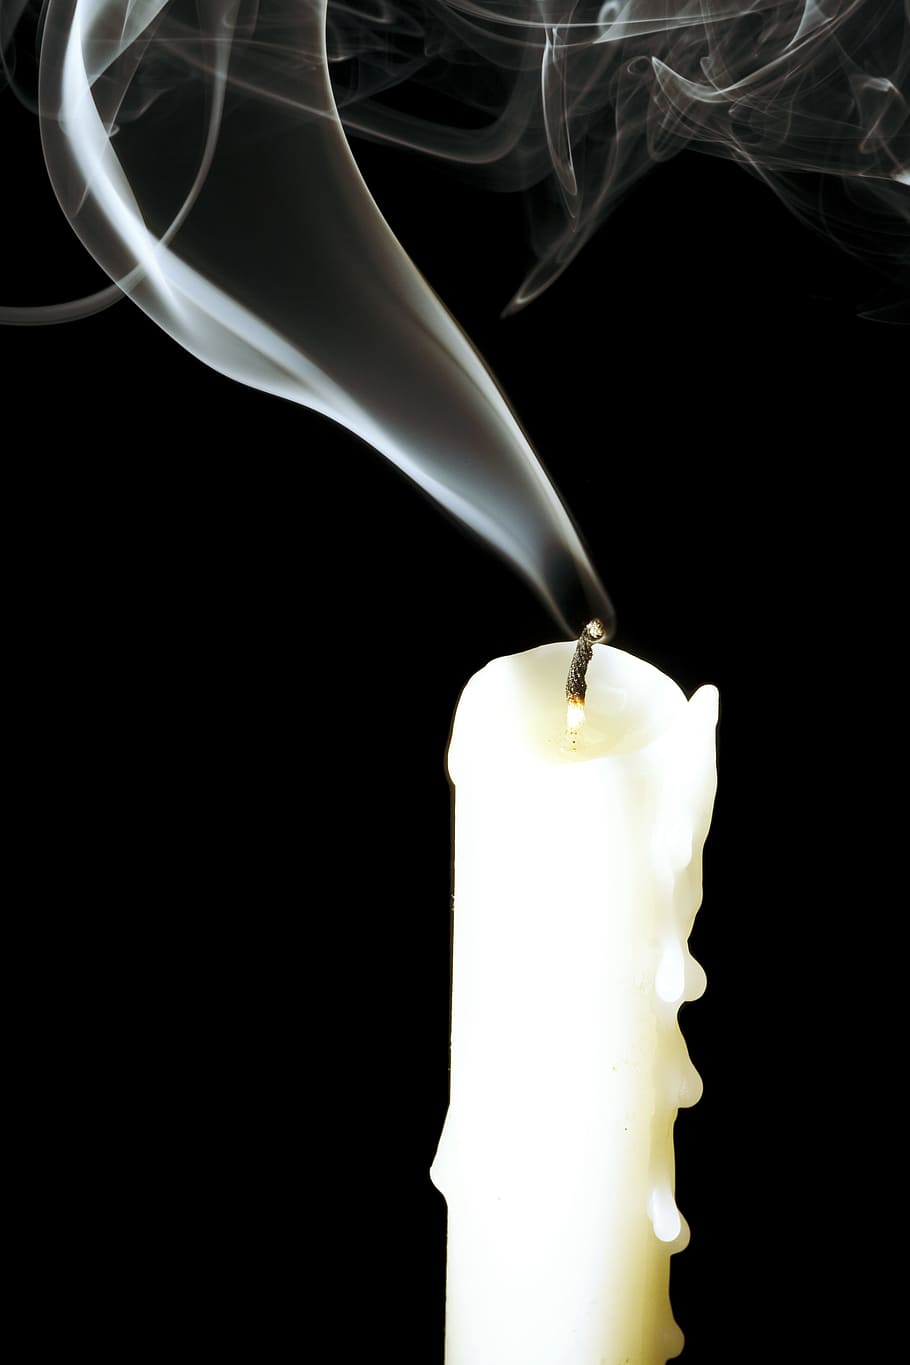 candle, wax, smoke, fire, light, burning, smoke - physical structure, flame, black background, close-up